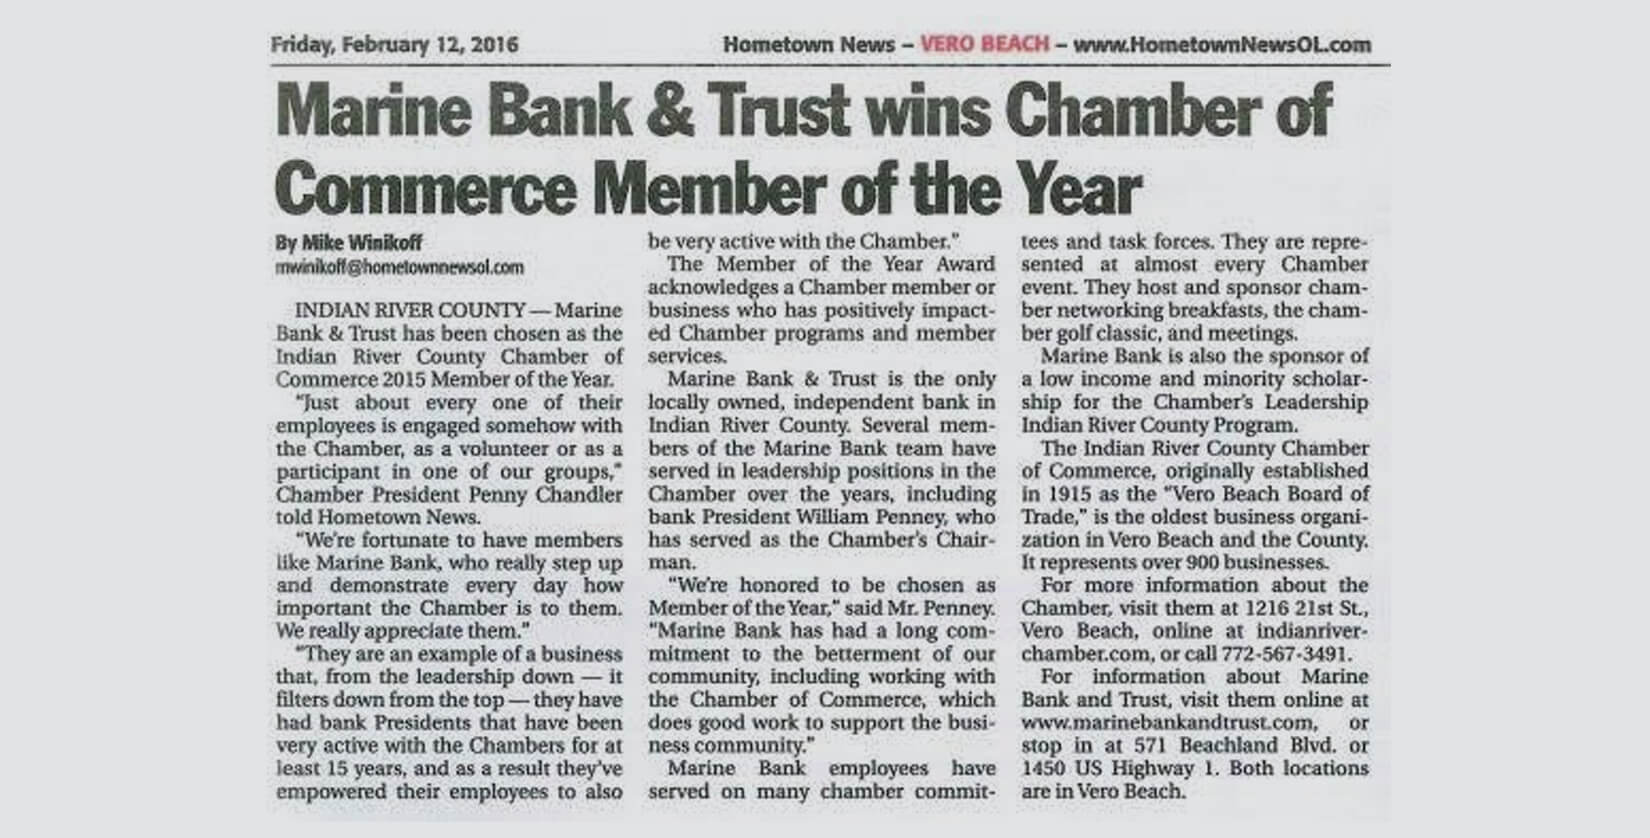 Marine Bank & Trust wins Chamber of Commerce Member of the Year